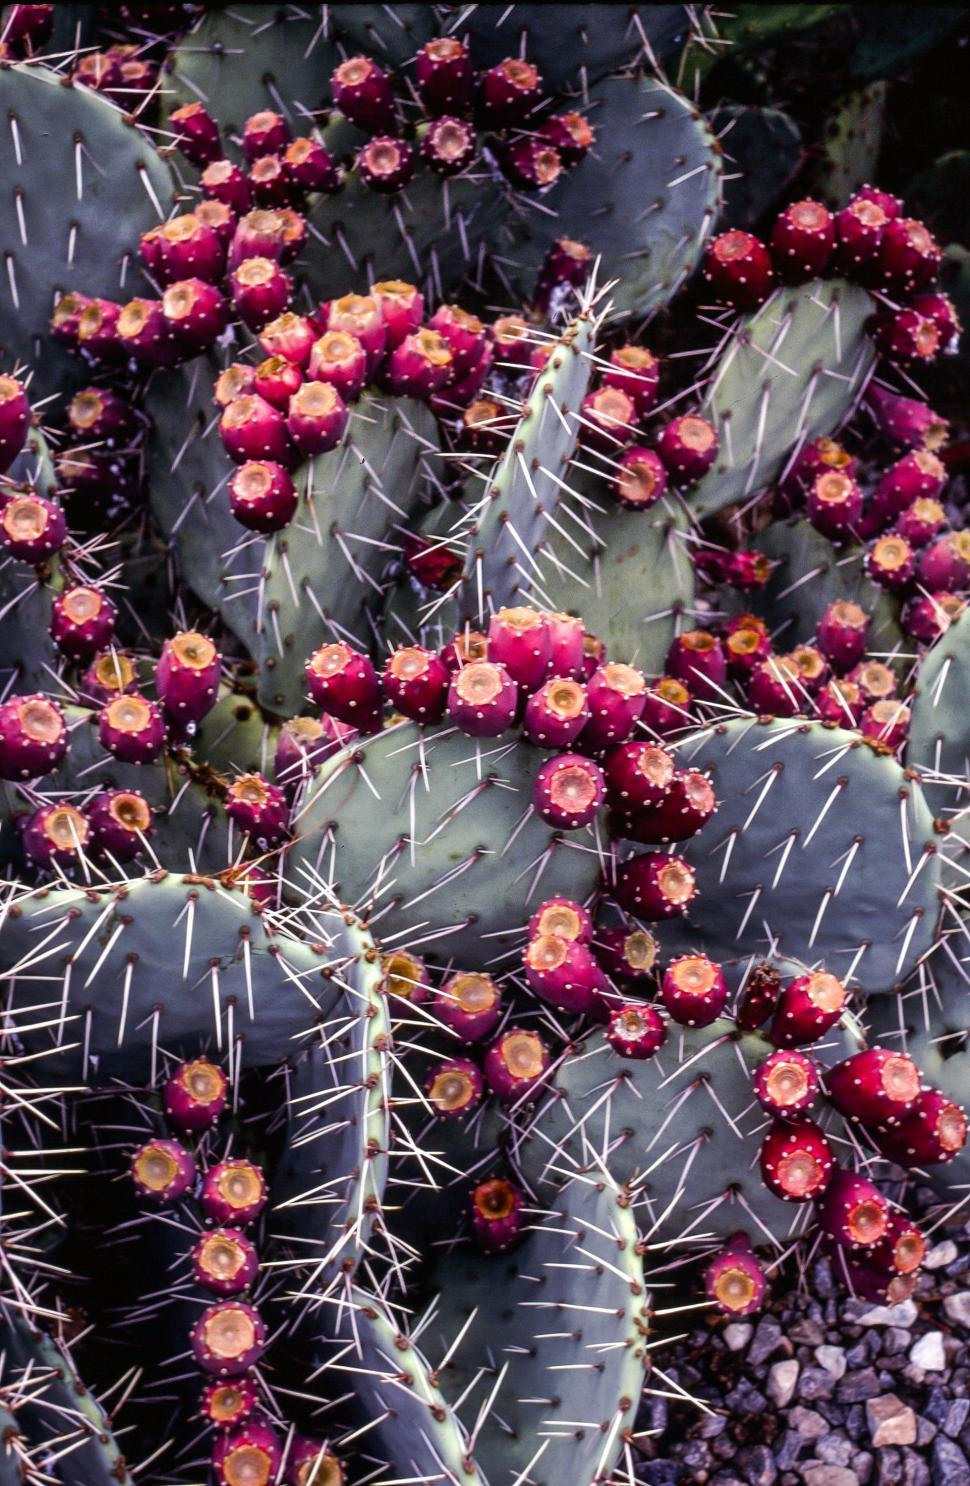 Free Image of Prickly pear fruits on cactus plant 